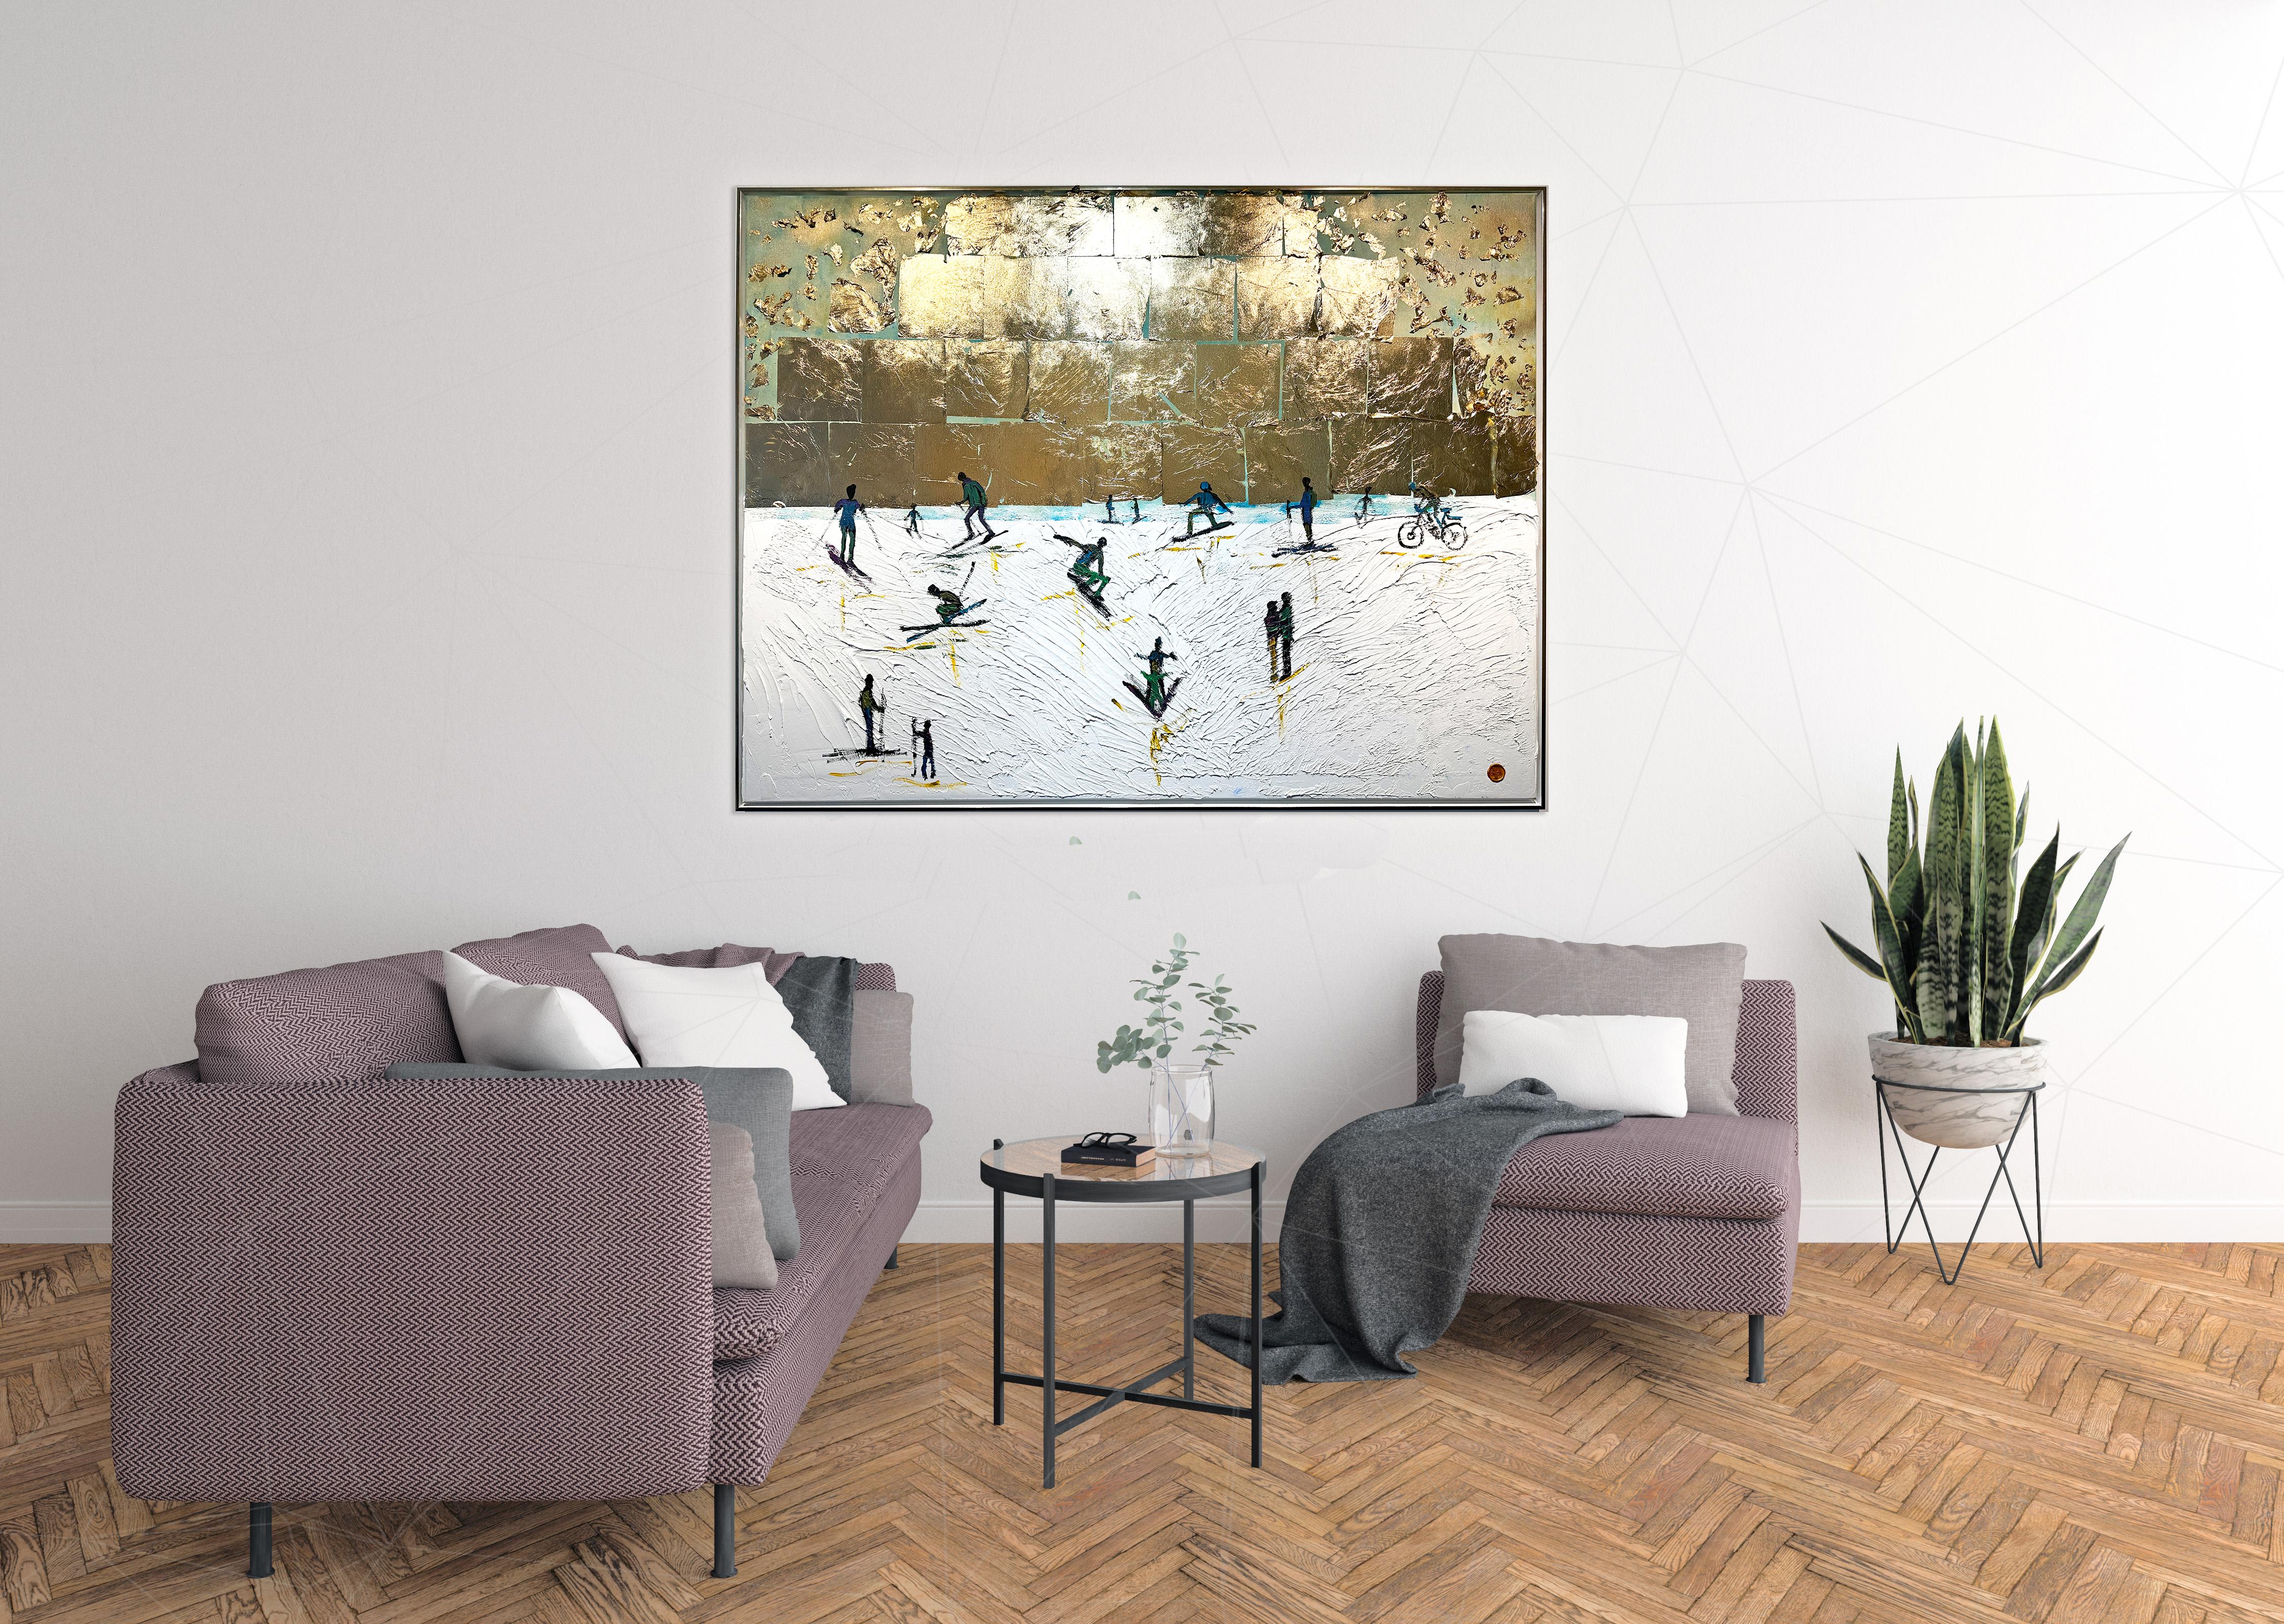 Winter Fun by K. Hormel - Gold Contemporary SKiing Landscape painting For Sale 1